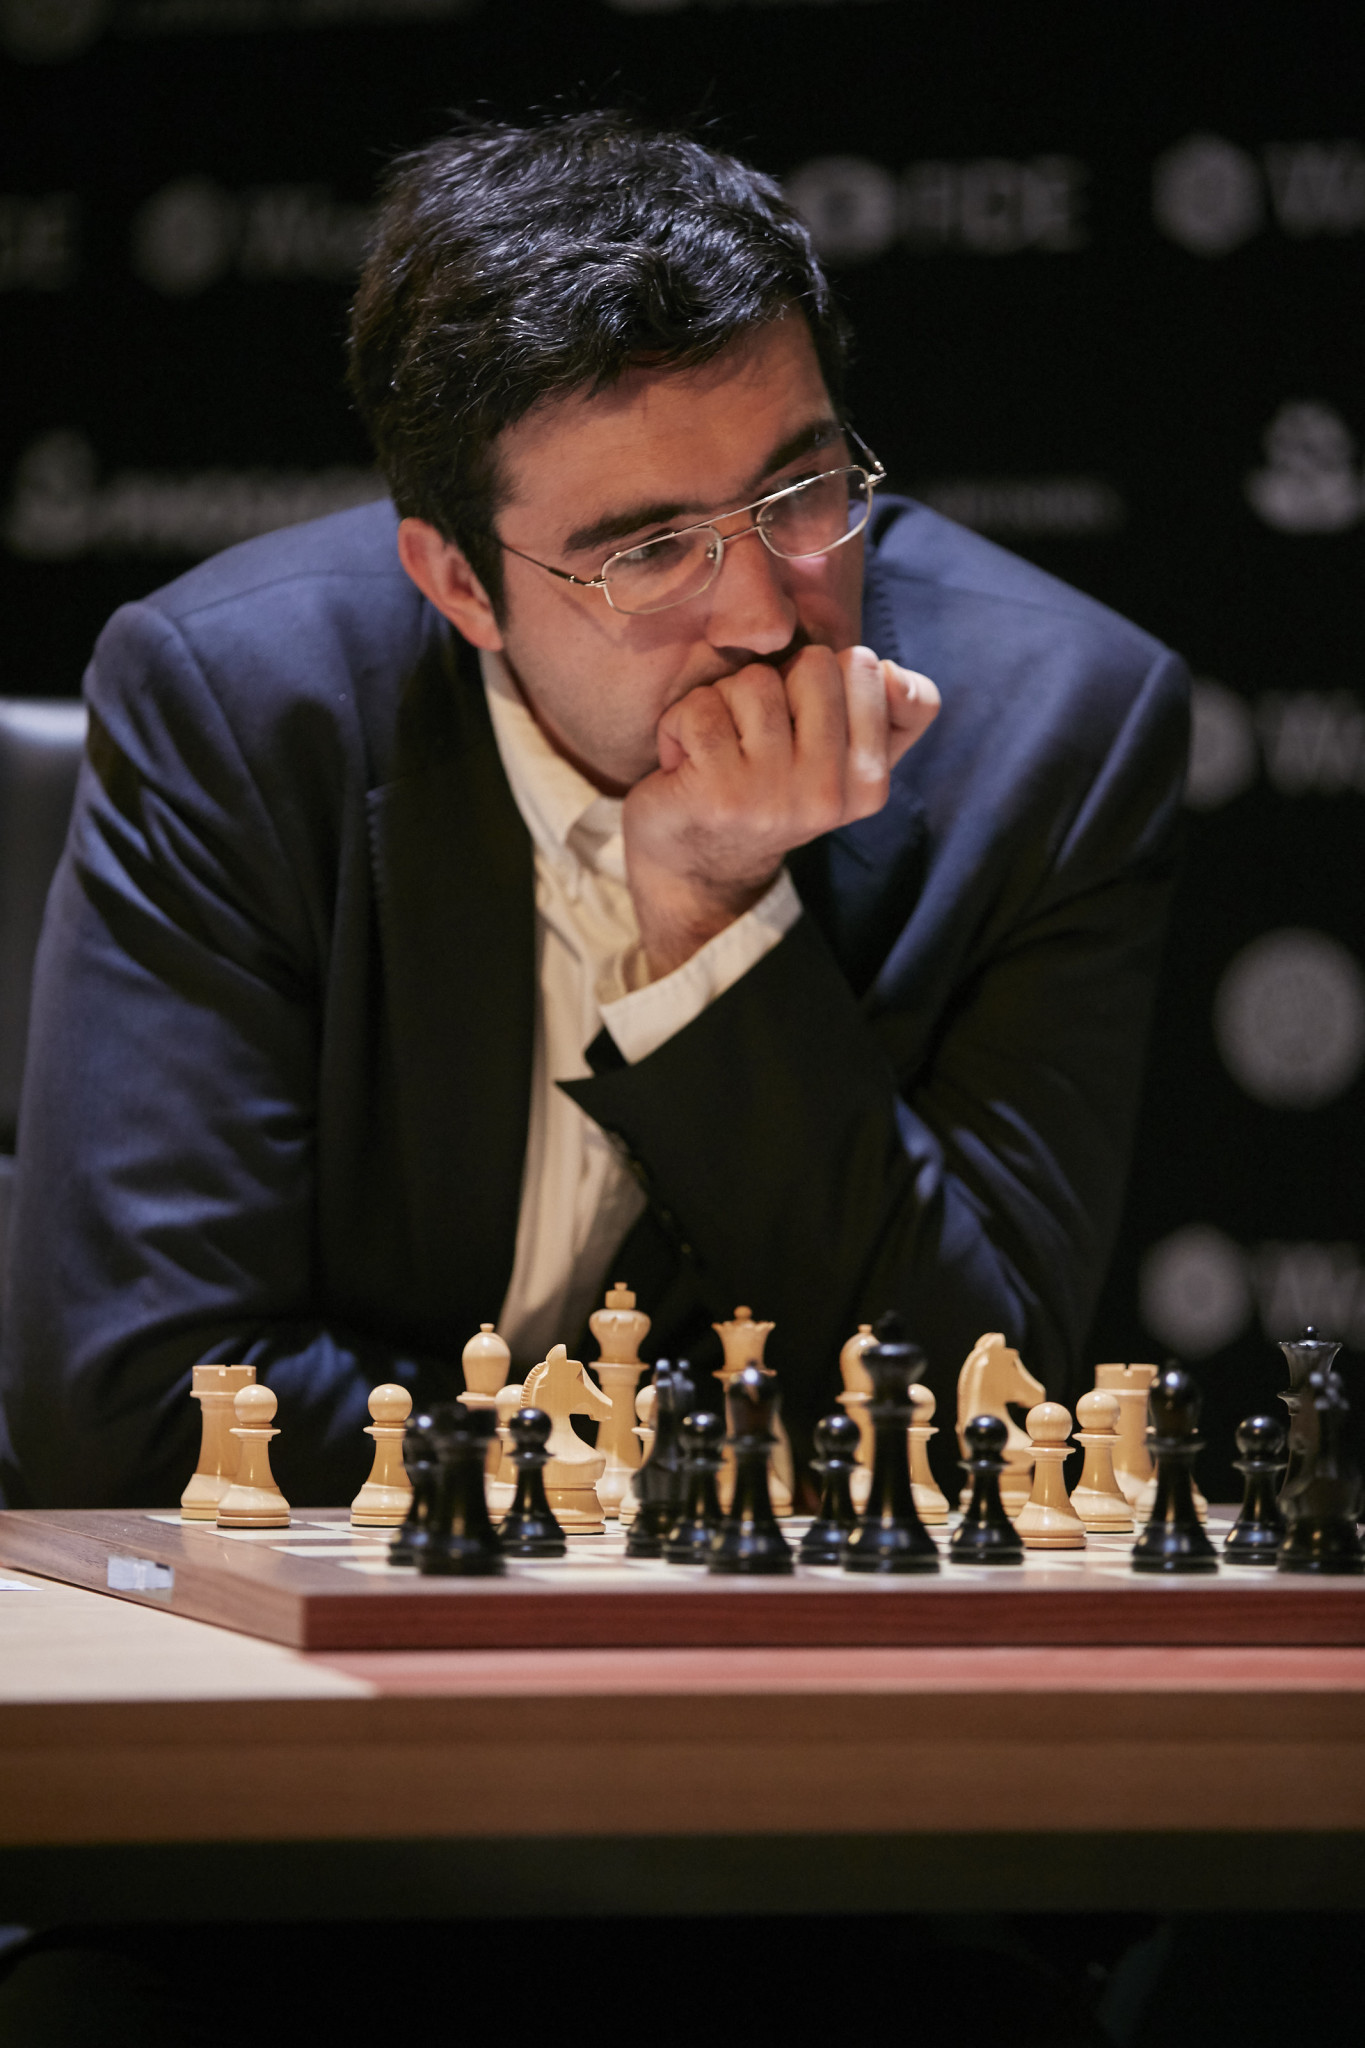 Russian wild card entry Vladimir Kramnik had an opening day victory at the FIDE Candidates Tournament for the right to challenge Norway’s 27-year-old Magnus Carlsen for the world title underway in Berlin ©Getty Images